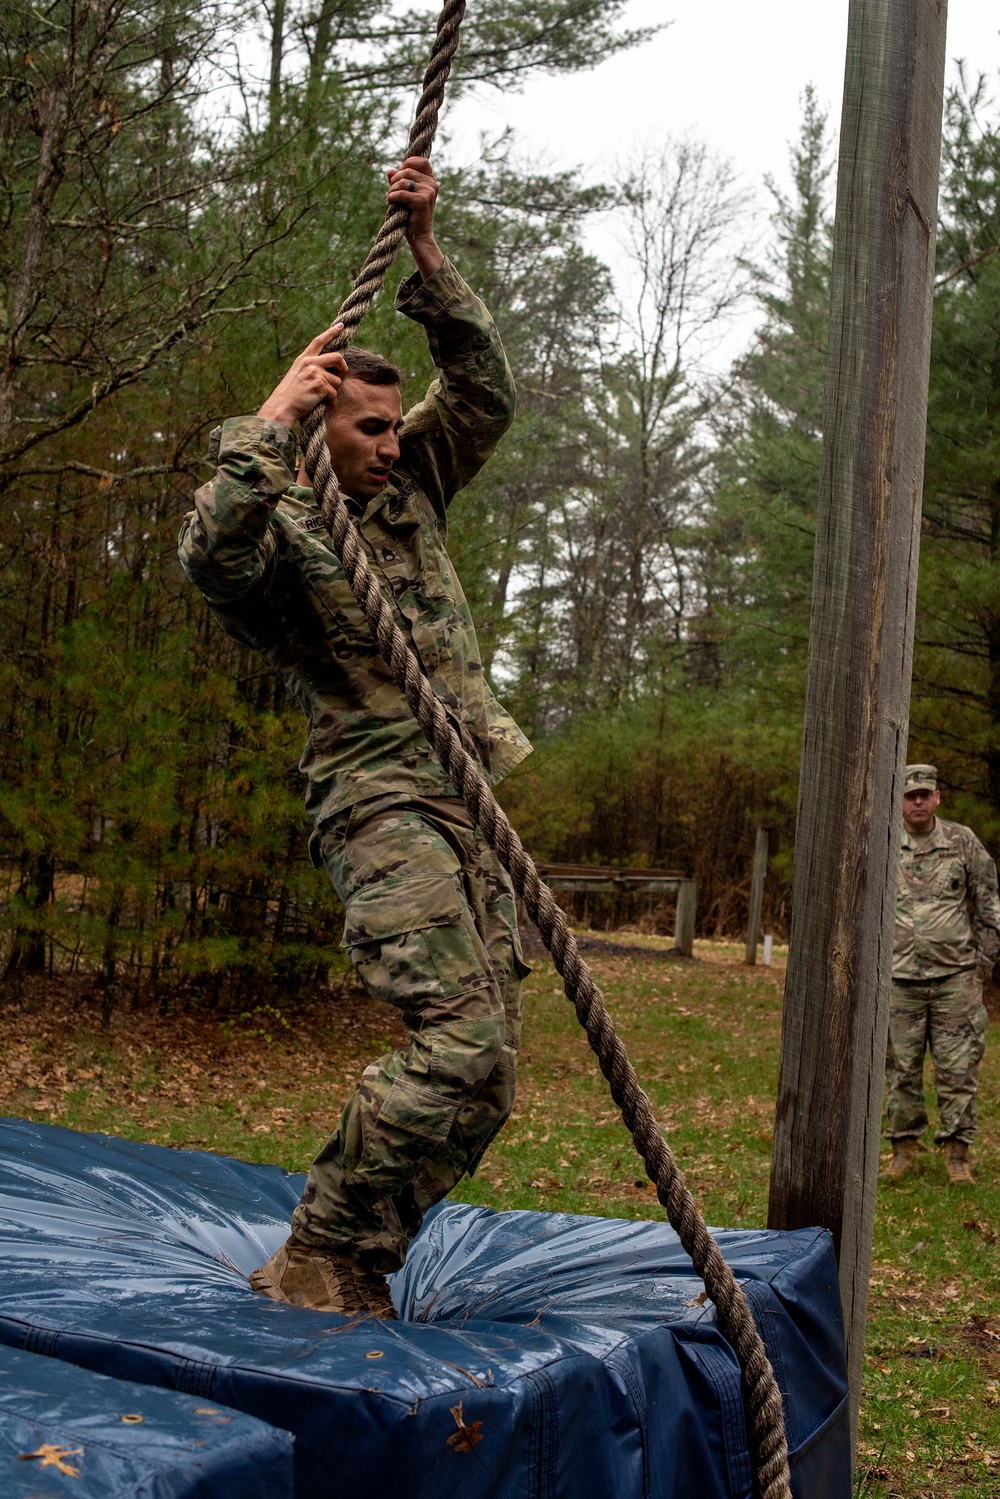 1st Army Division East Best Warrior Competition 2019